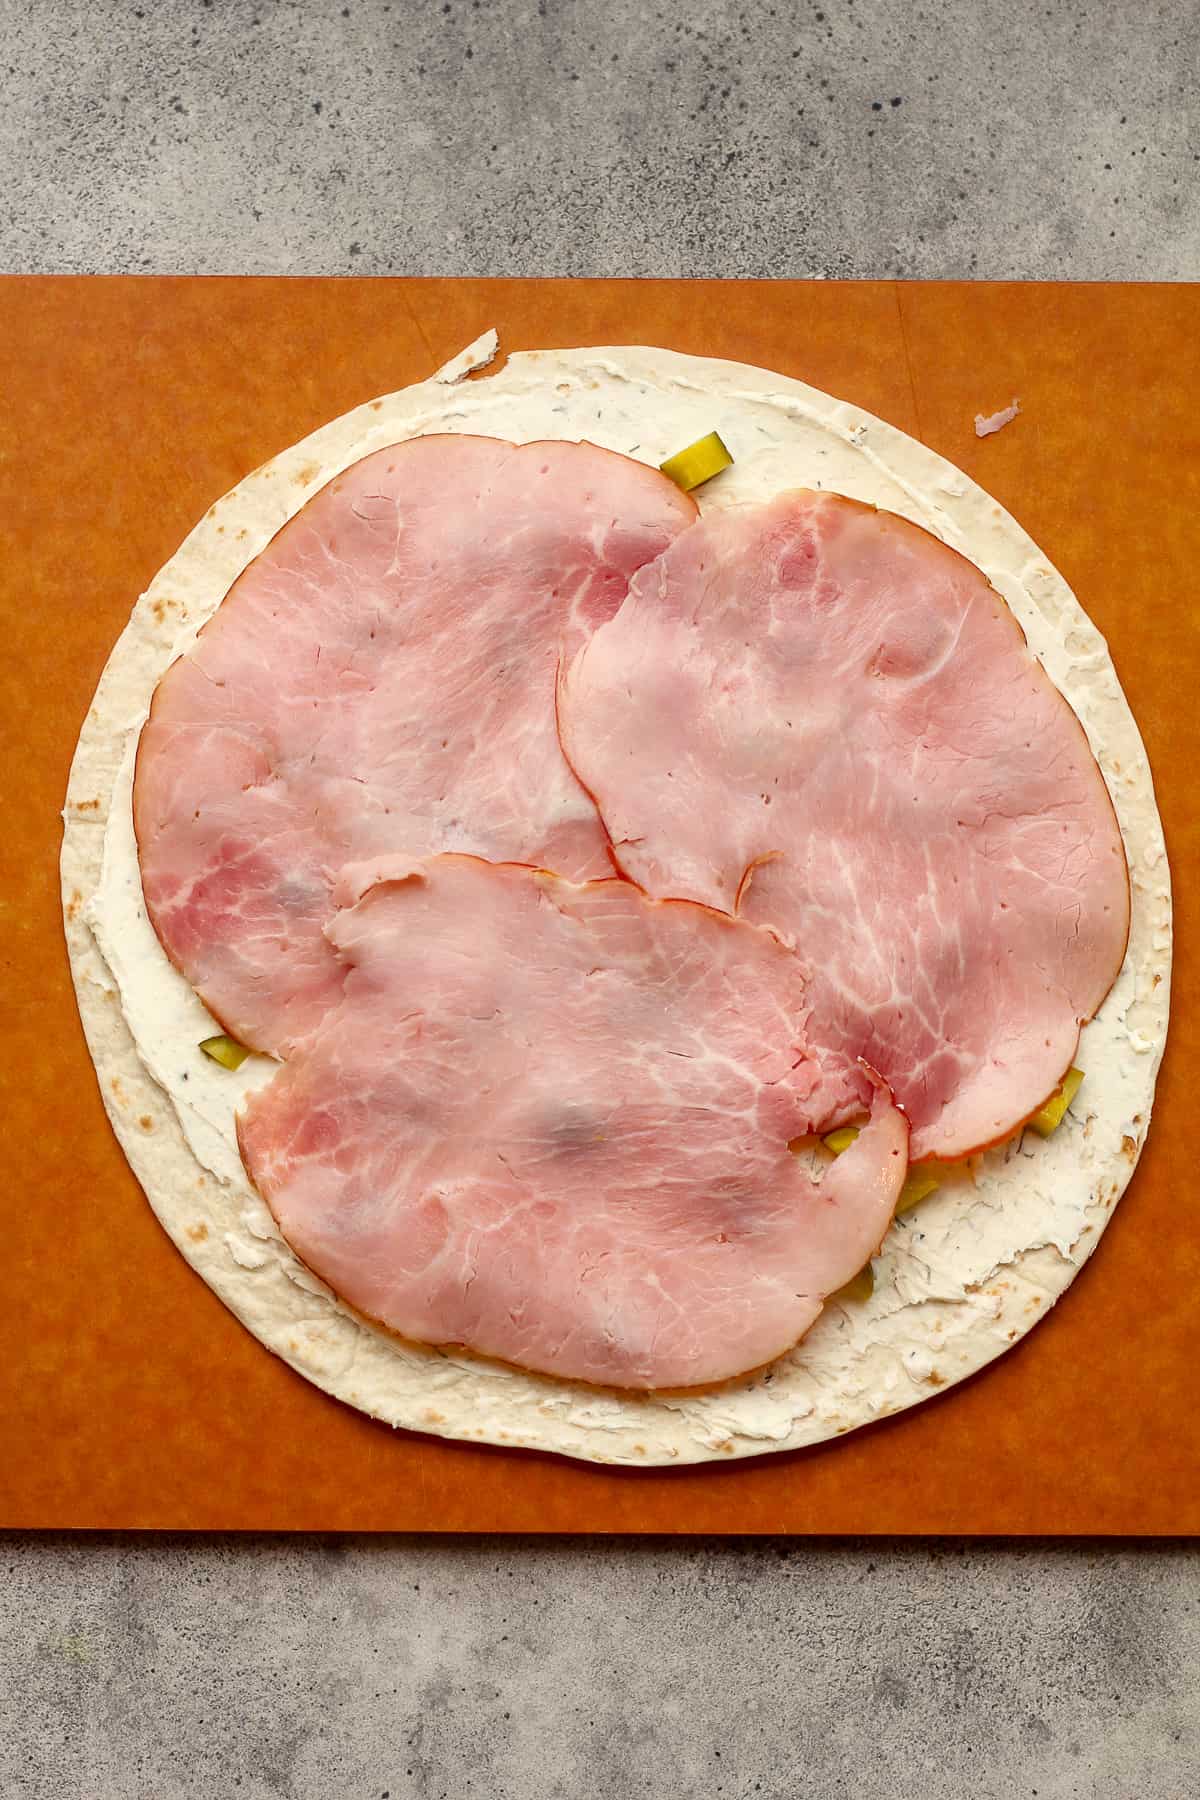 A cutting board with a large tortilla, cream cheese, pickles, plus ham on top.